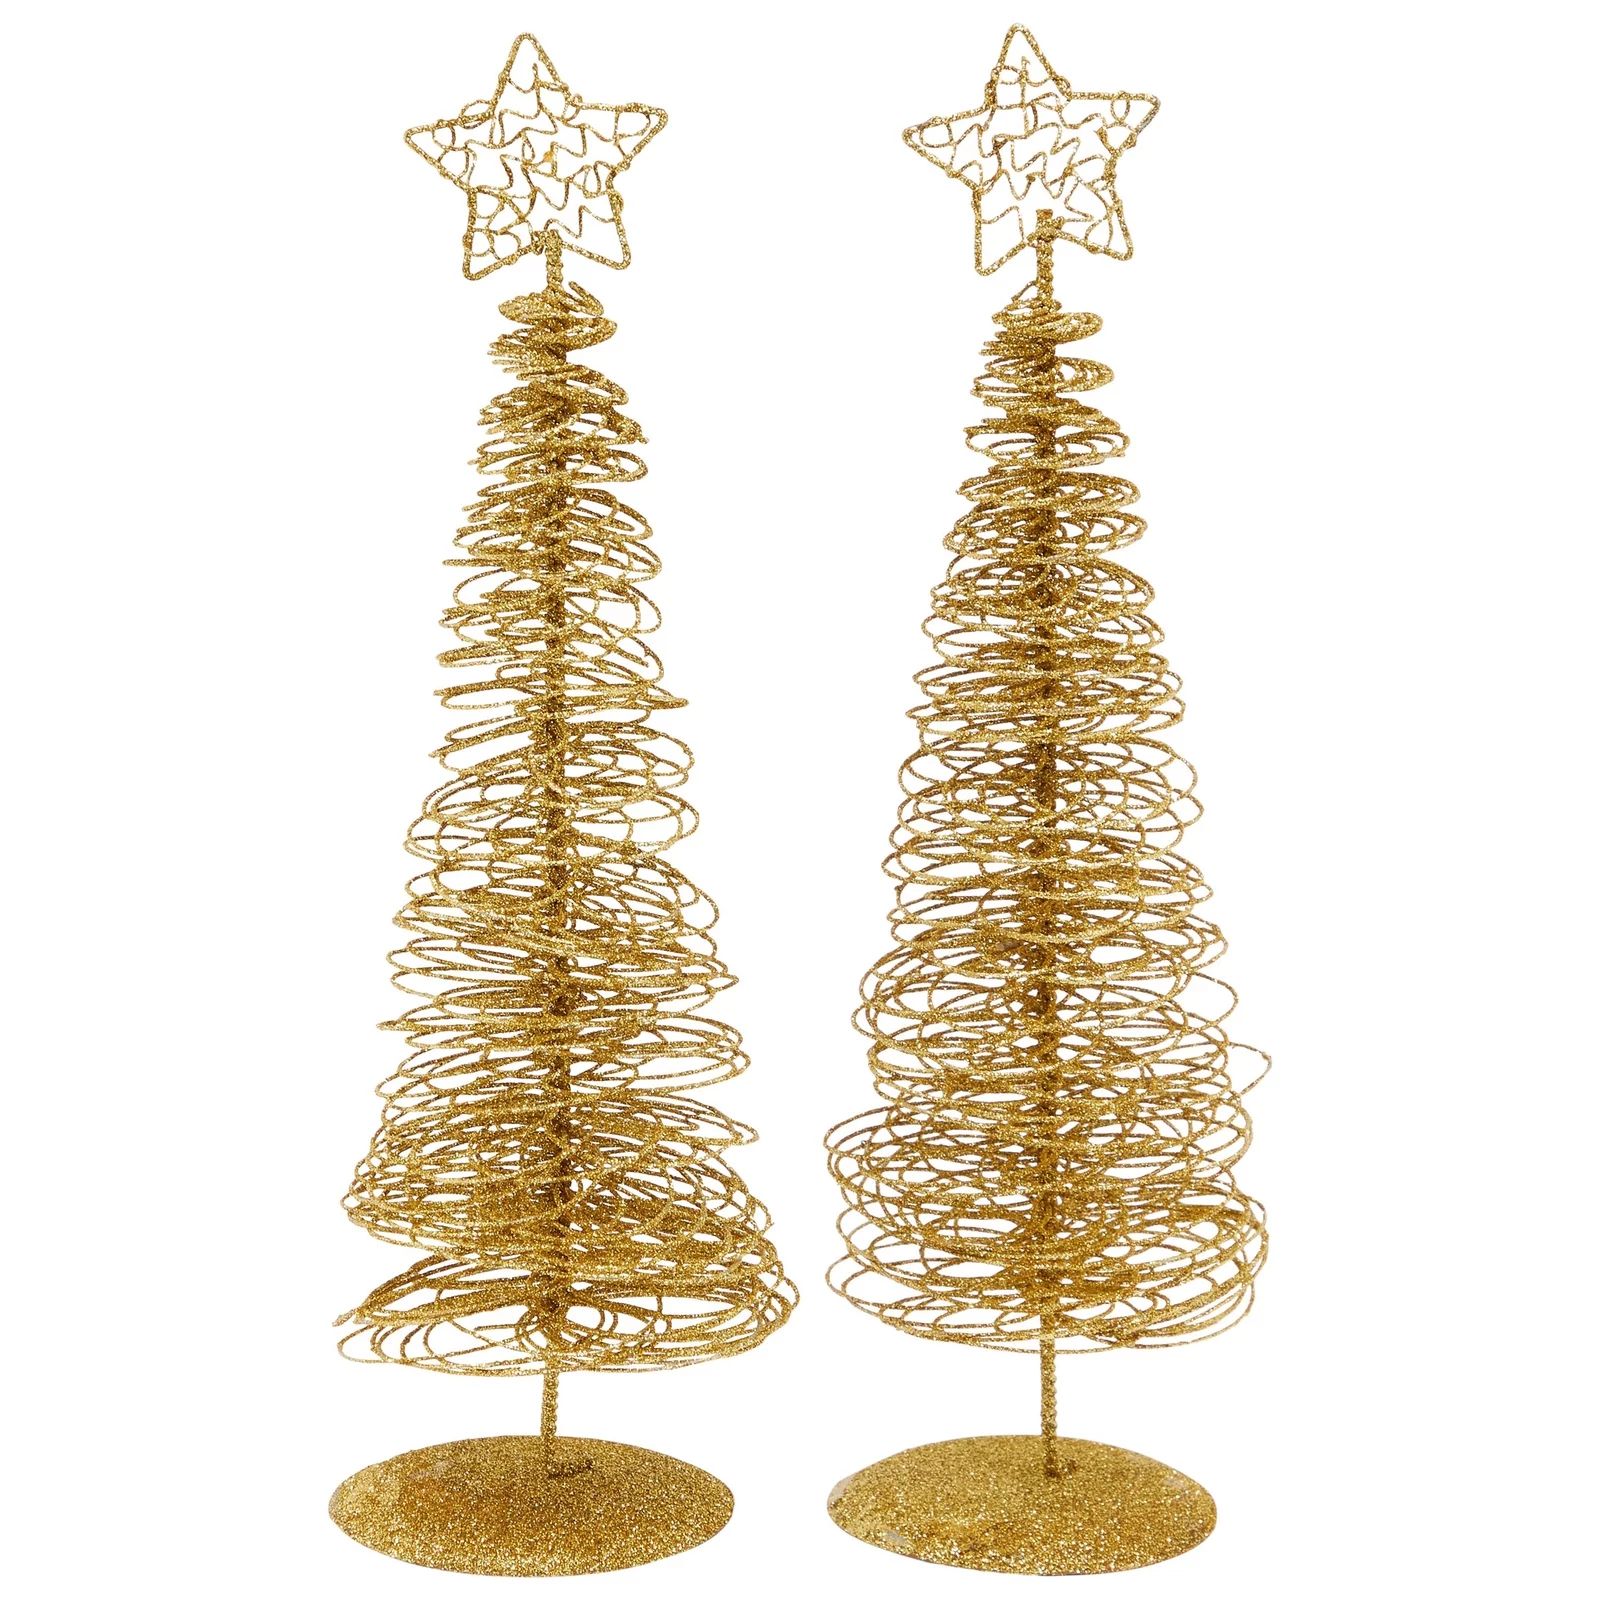 2 Pack Small Gold Christmas Tree Decorations for Table Top Holiday Decor (3 x 10.5 Inches) - Walm... | Walmart (US)